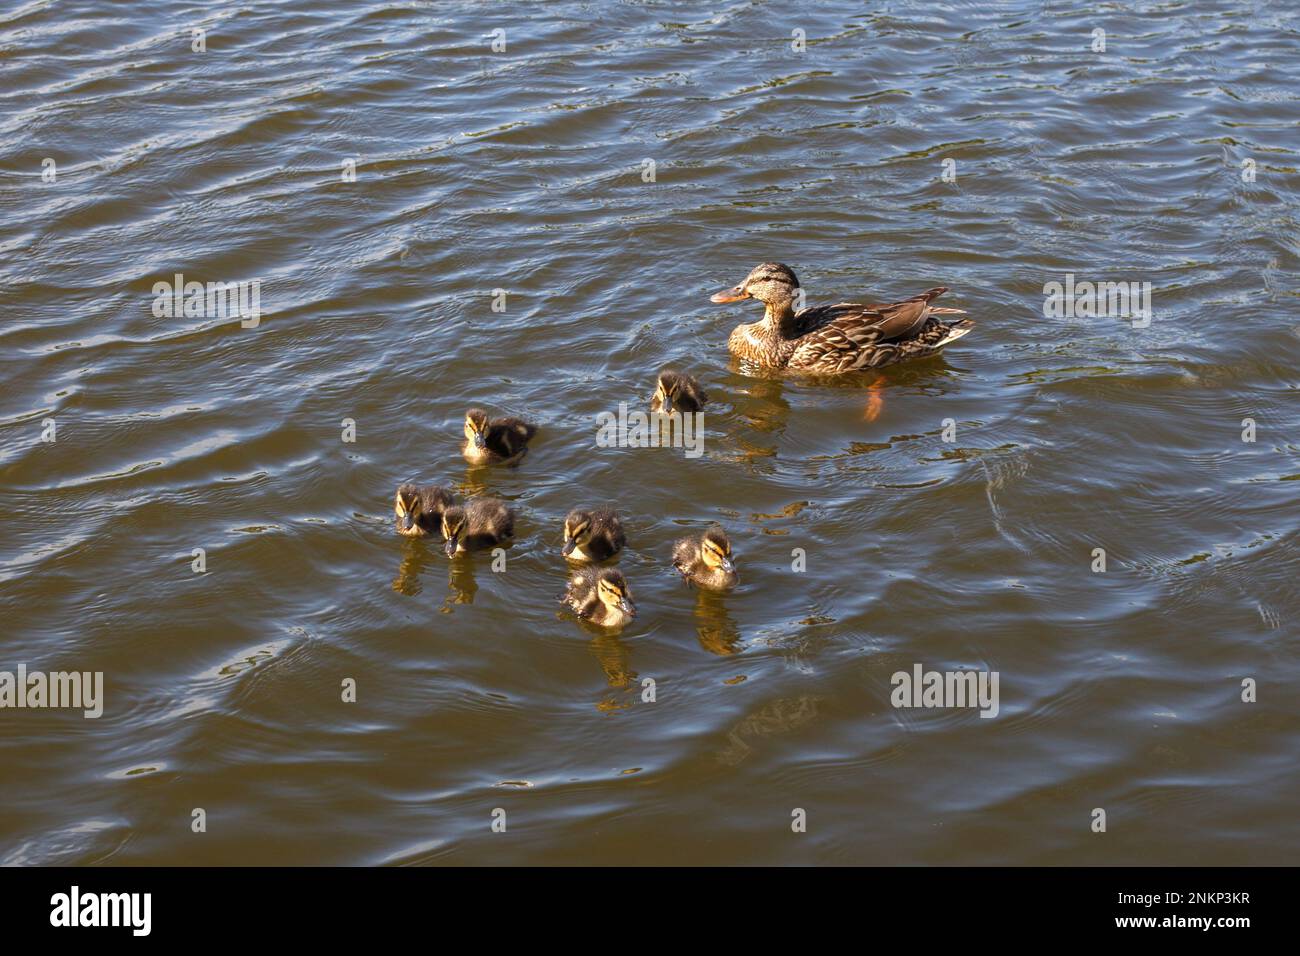 Mother duck with her group of beautiful, fluffy ducklings swimming together on a lake. Wild animals in a pond. Stock Photo